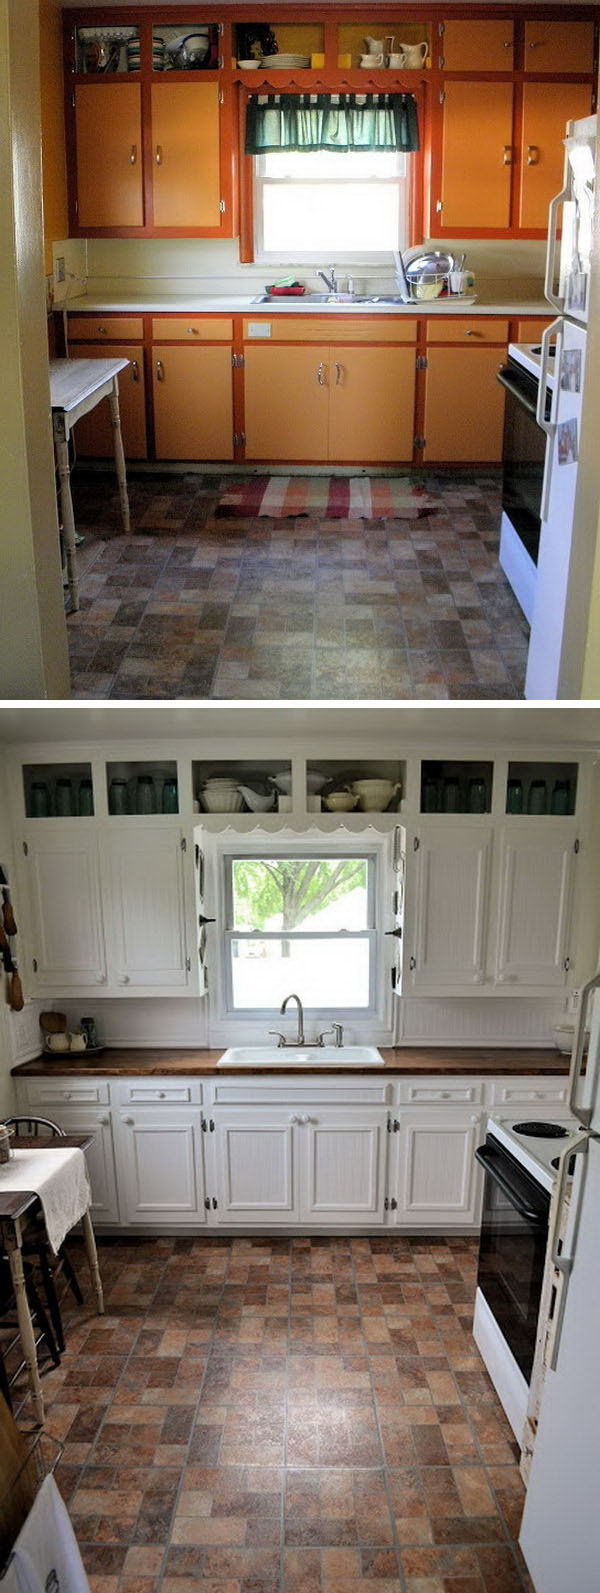 Wow, what a transformation.  It's light, bright and very charming.  I love that they replaced the cabinet facing and replacing of  wood counter tops which gives a worm and  rustic look fitting the tiles very much. The ugly outdated kitchen now is pretty stylish with the minimal remodeling. See how to feature it 